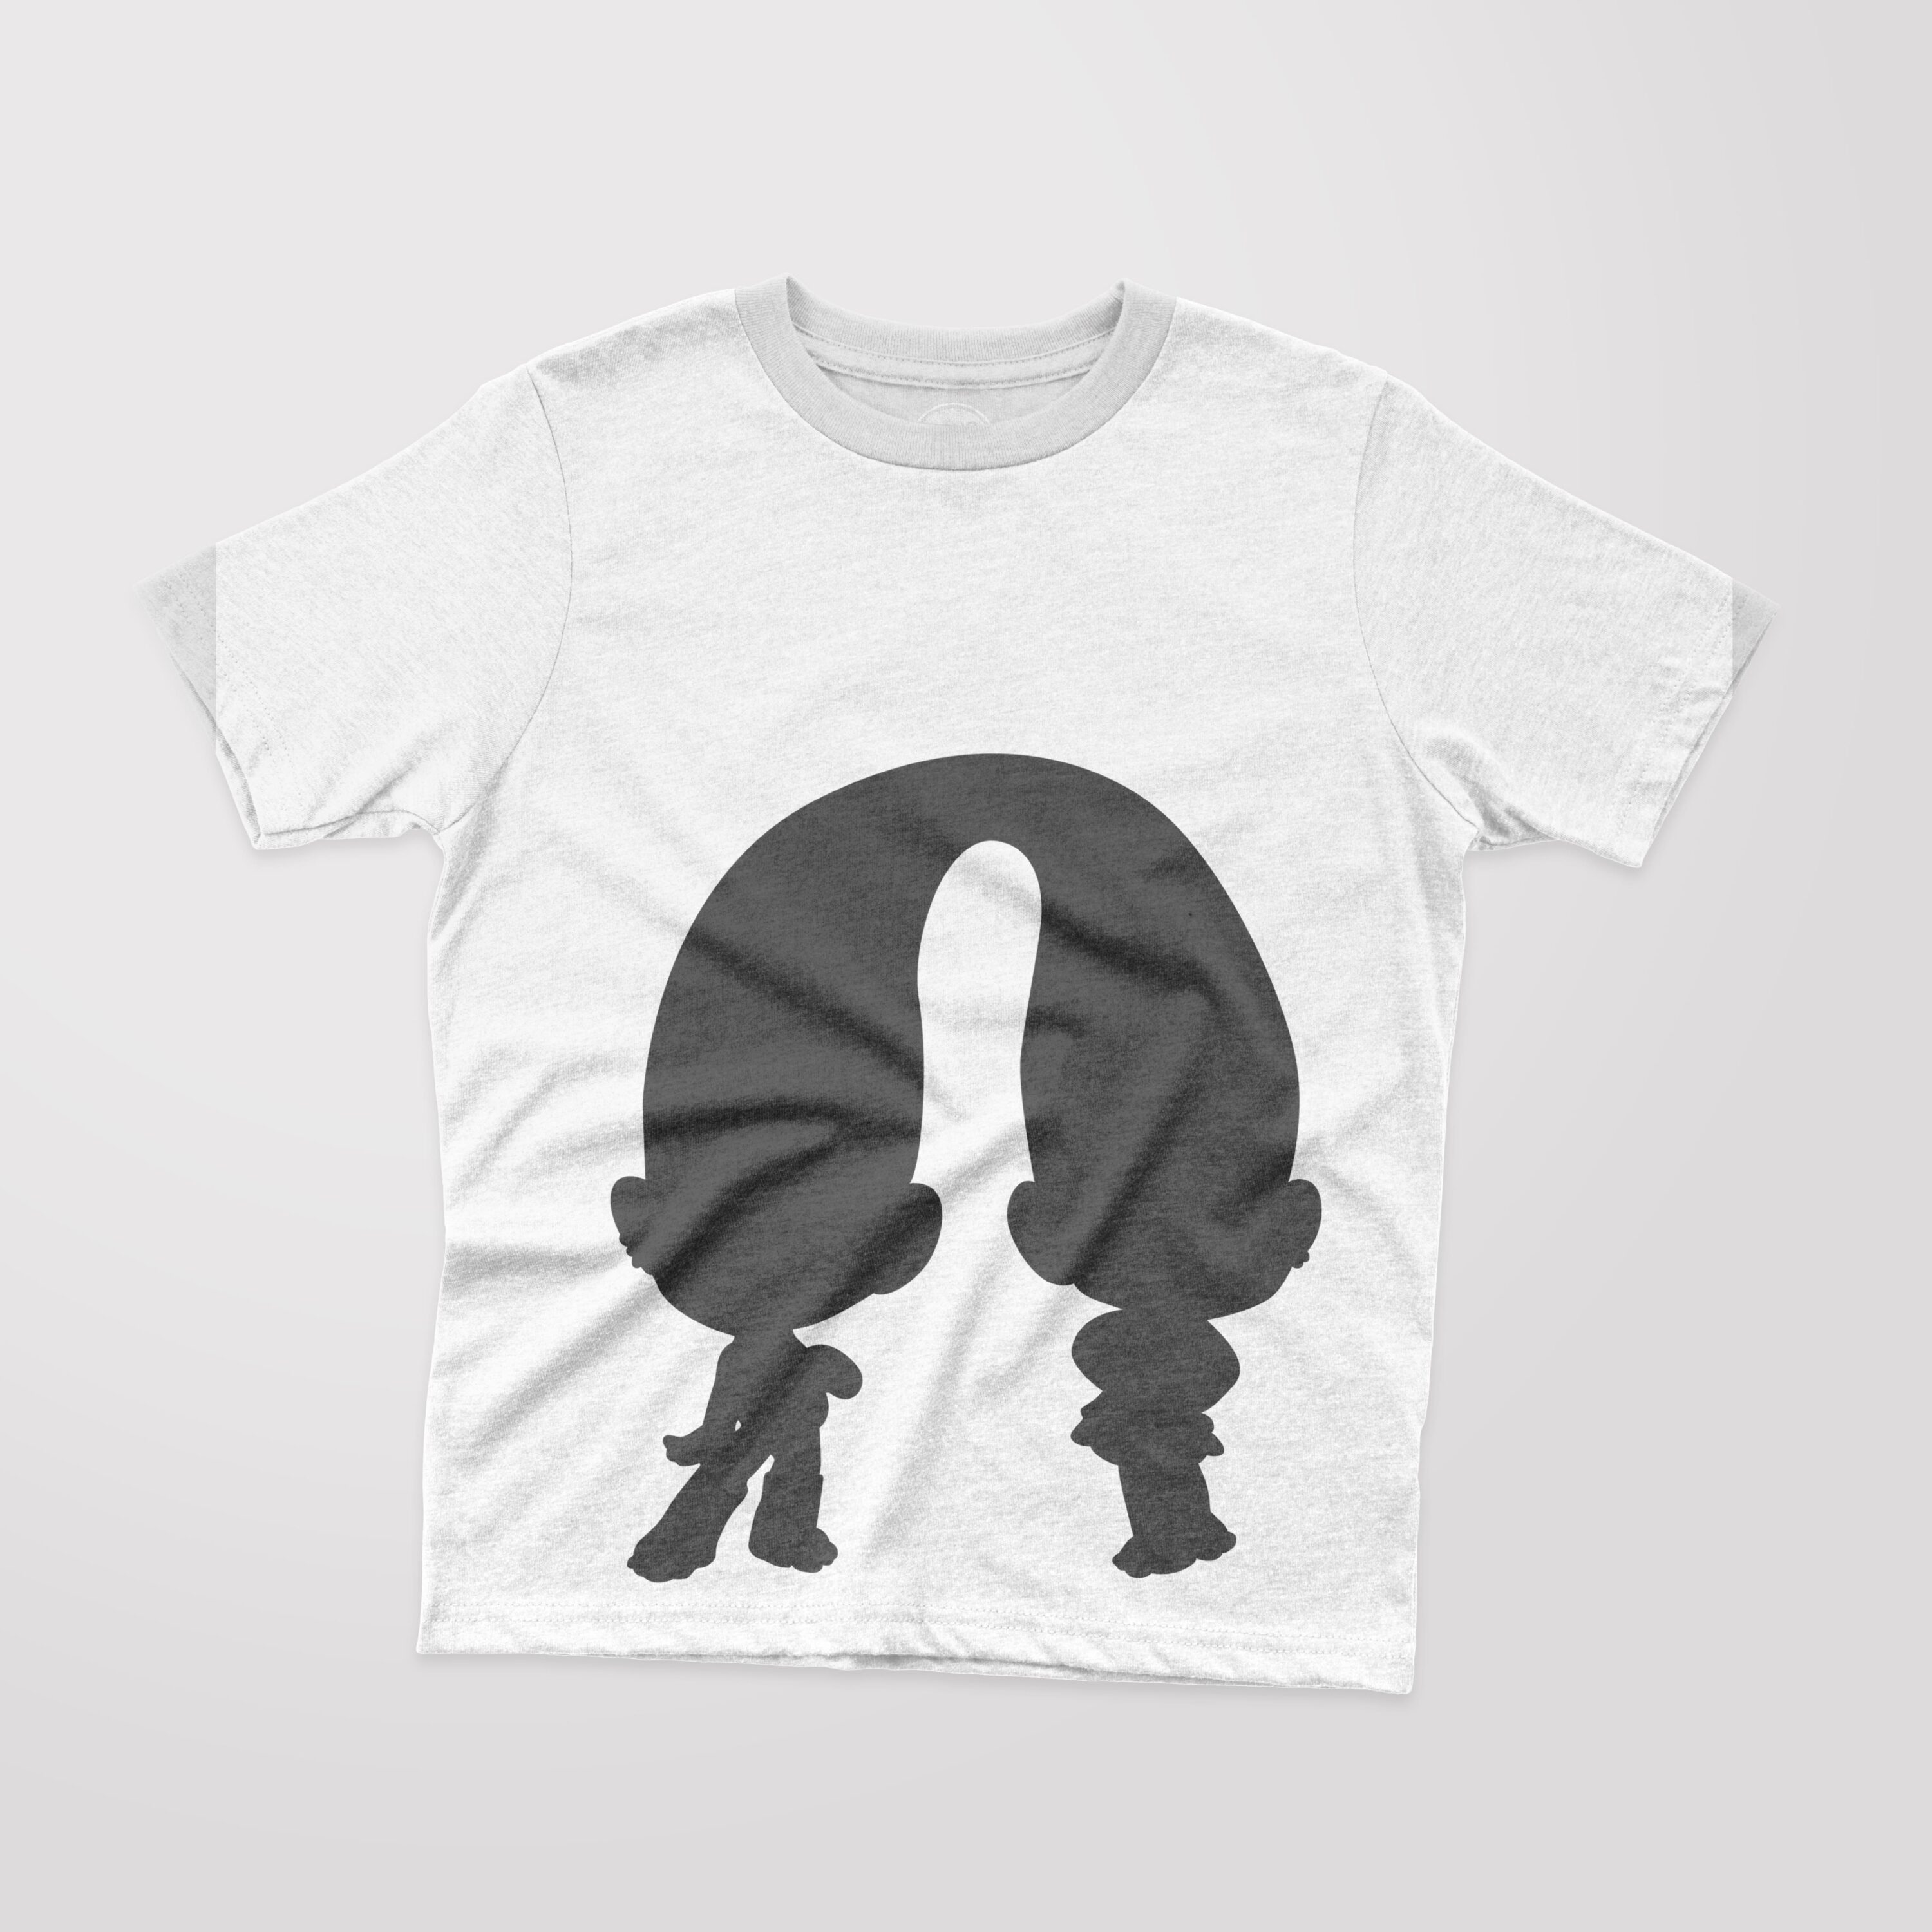 White T-shirt with a black silhouette of a cartoon character - Satin and Chenille.